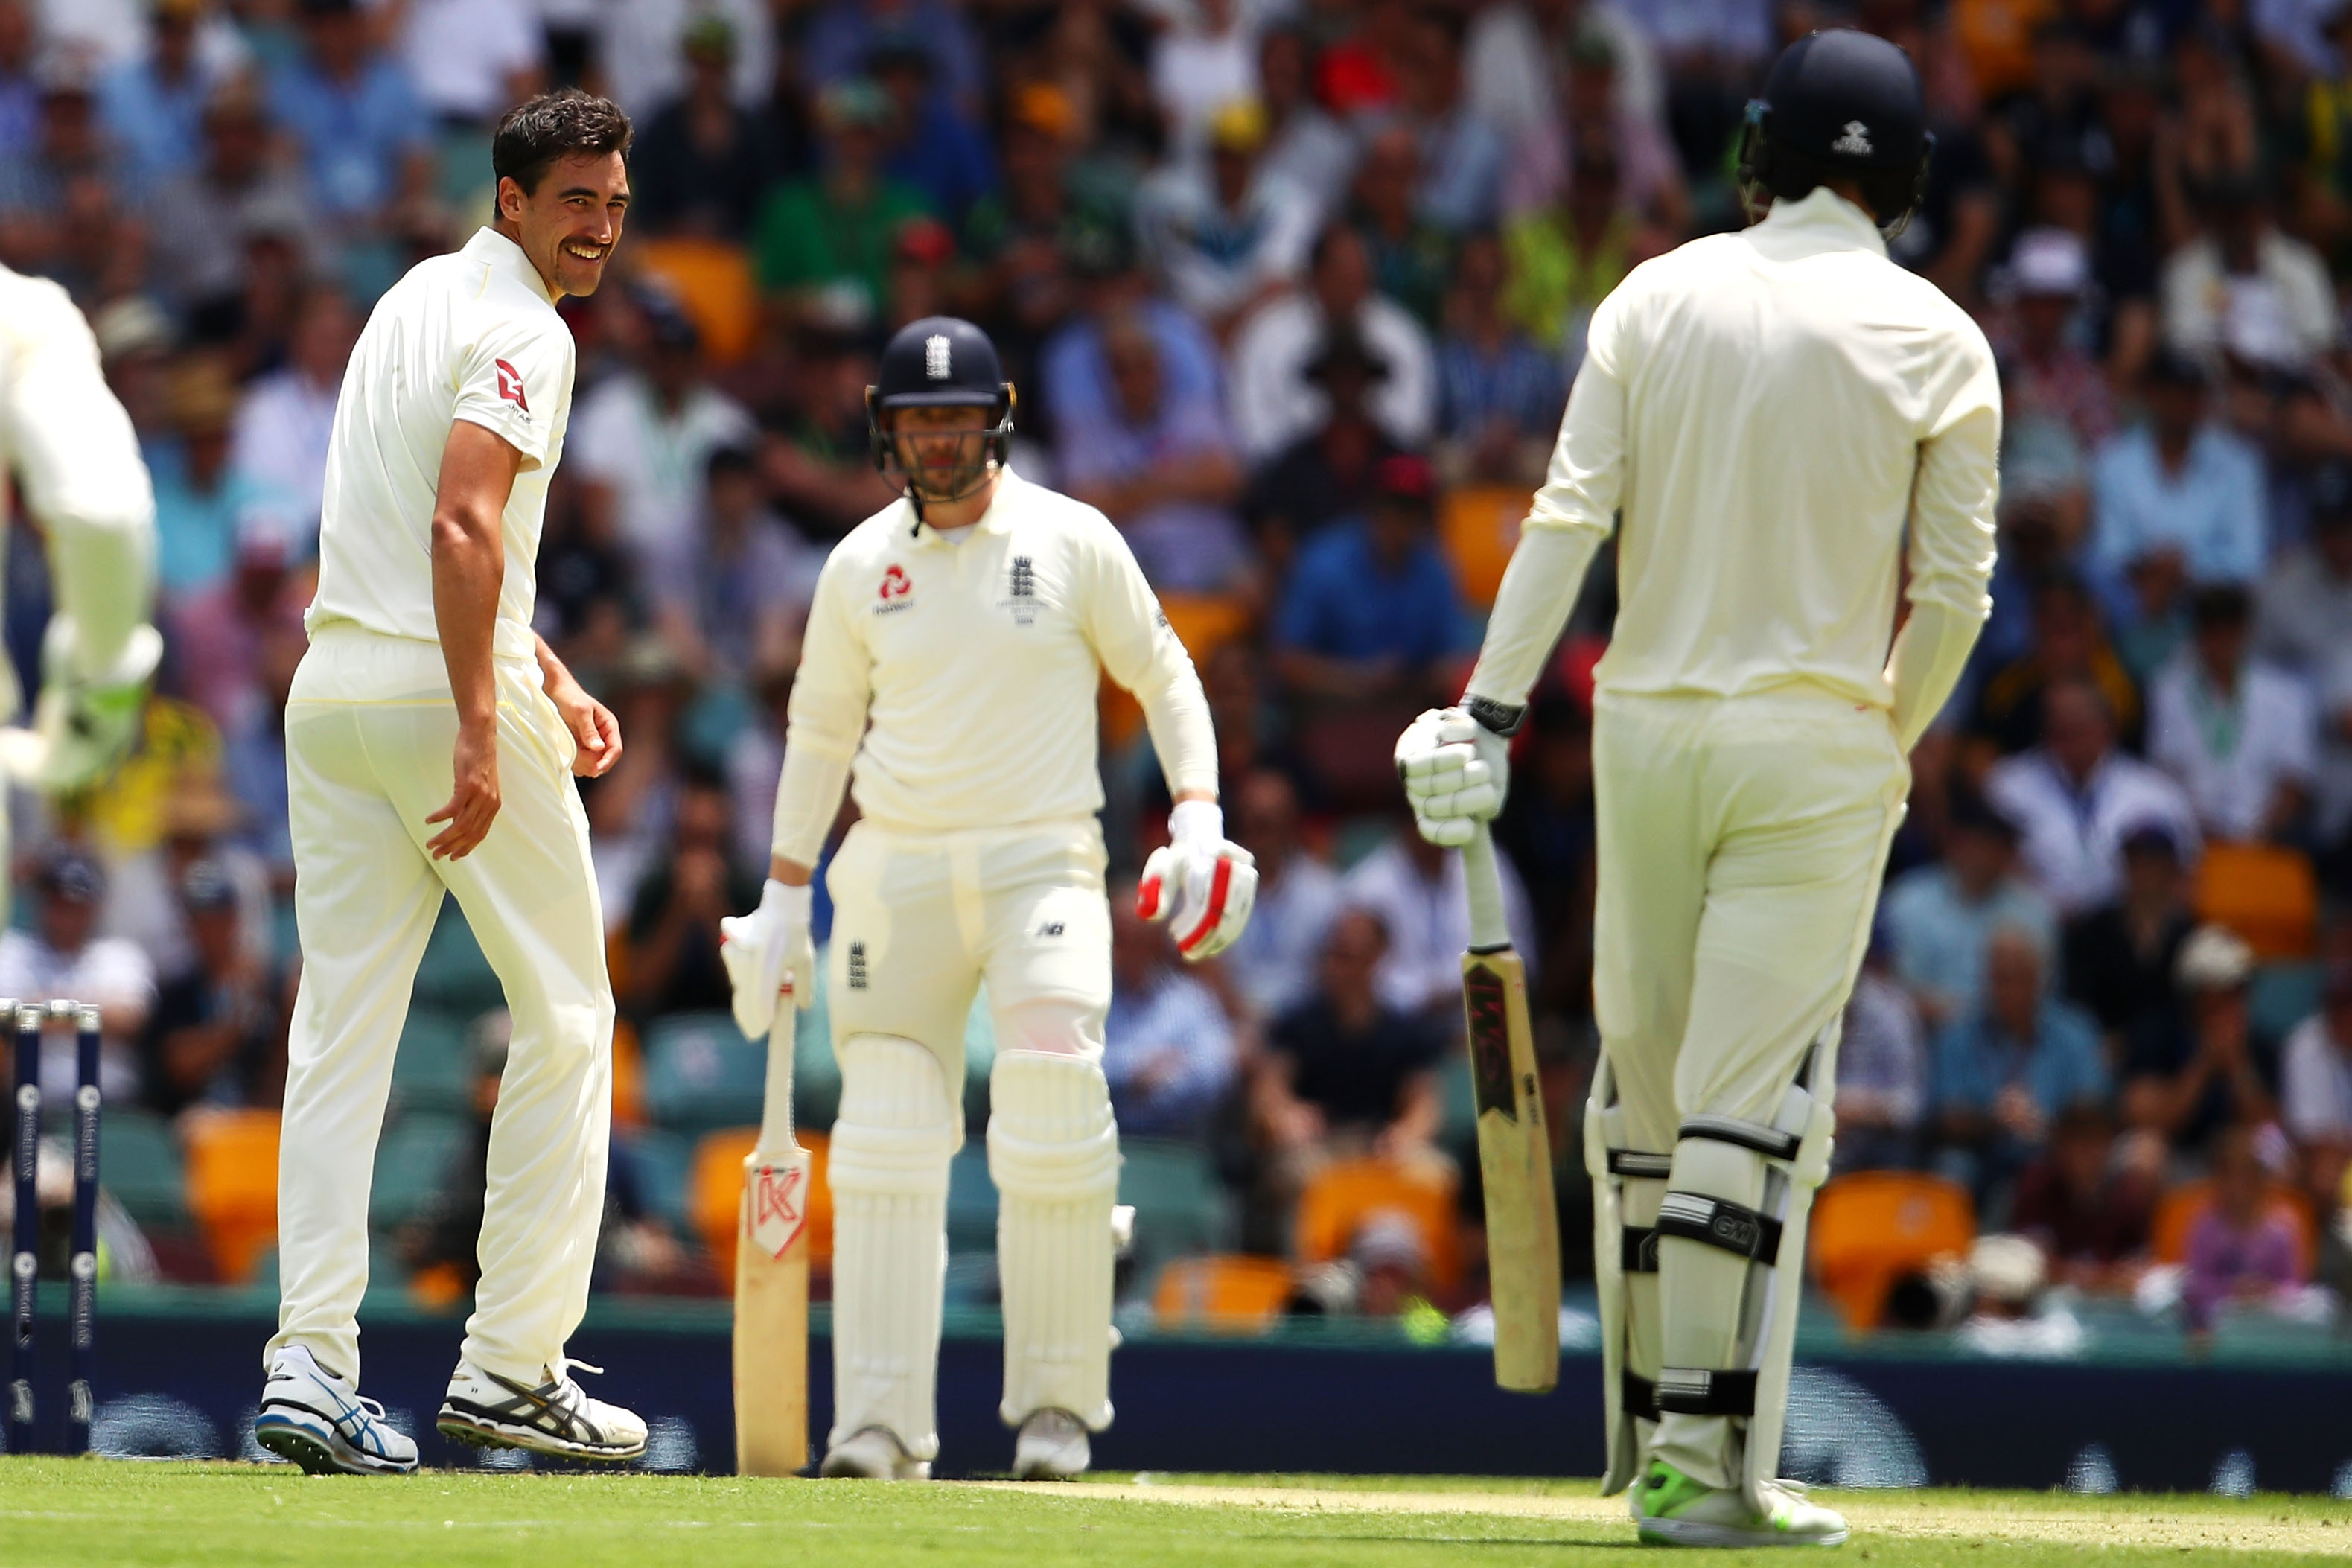 Australia go 2-0 up after England succumb to Mitchell Starc bowling